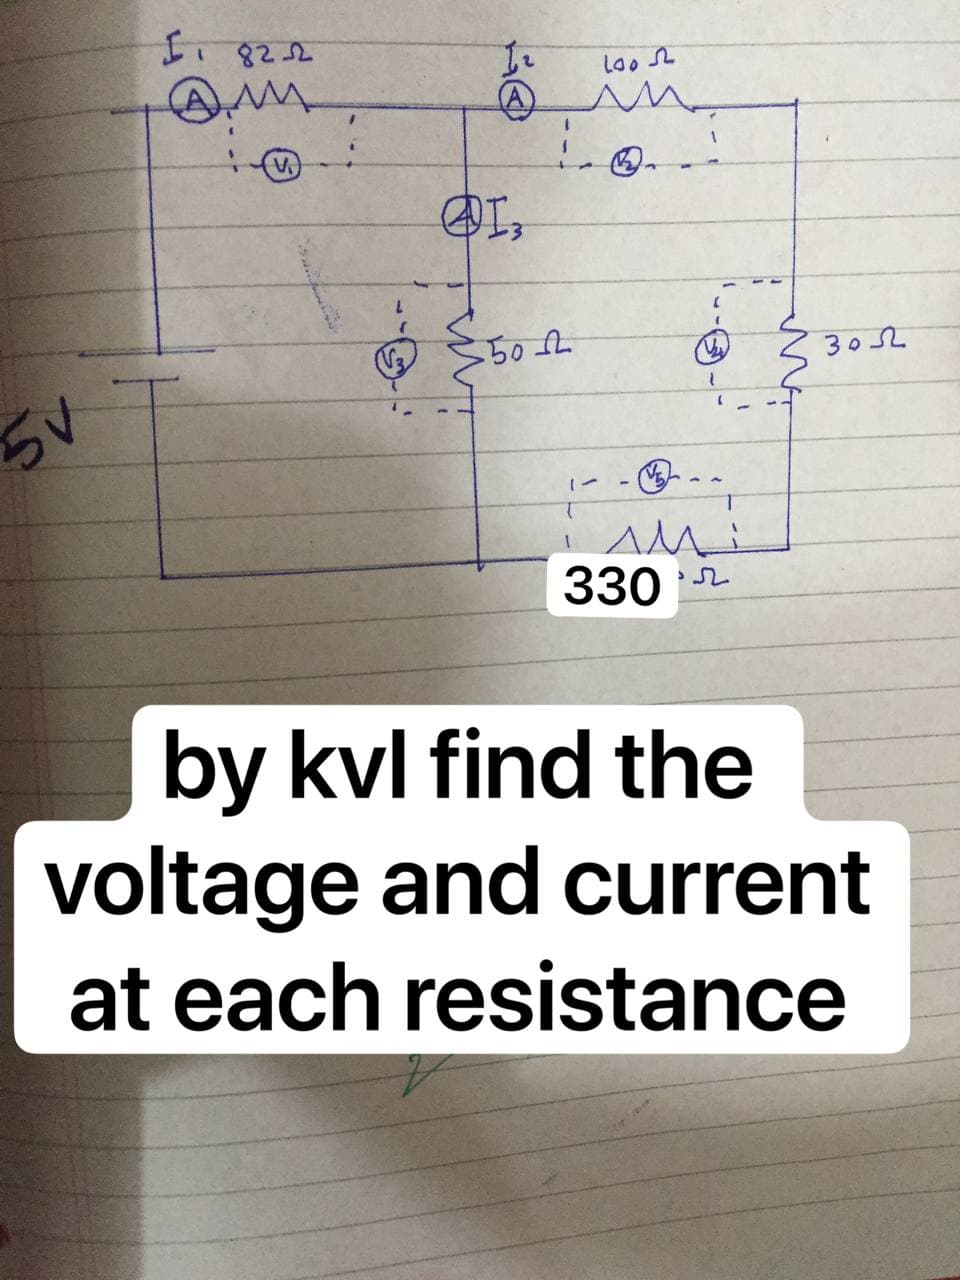 3.
305
330 r
by kvl find the
voltage and current
at each resistance
